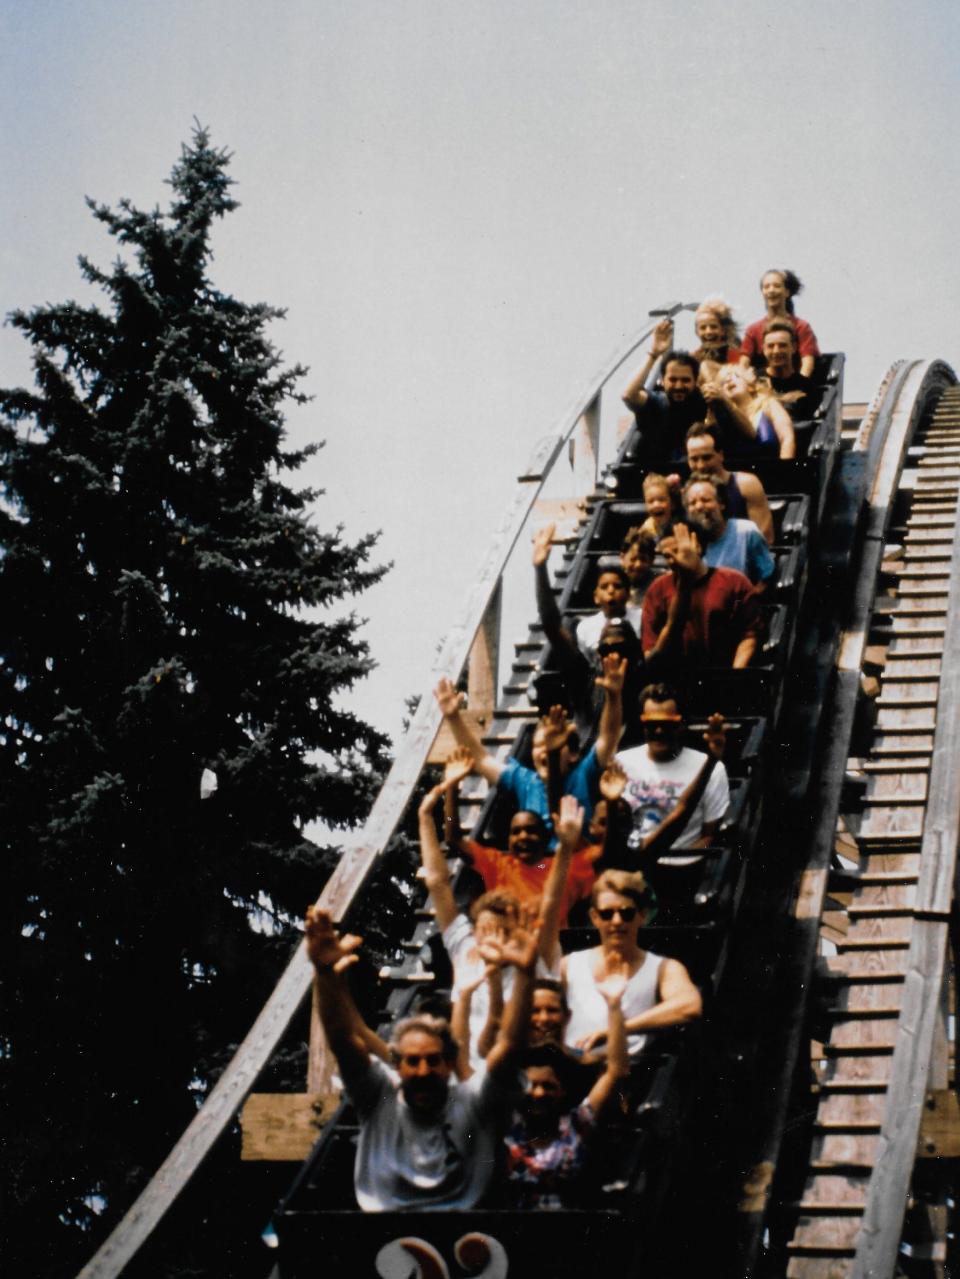 Industrial Commercial Properties said it would name a street in the development in honor of Geauga Lake Park's longtime wooden roller coaster, The Big Dipper, shown here in 1996.